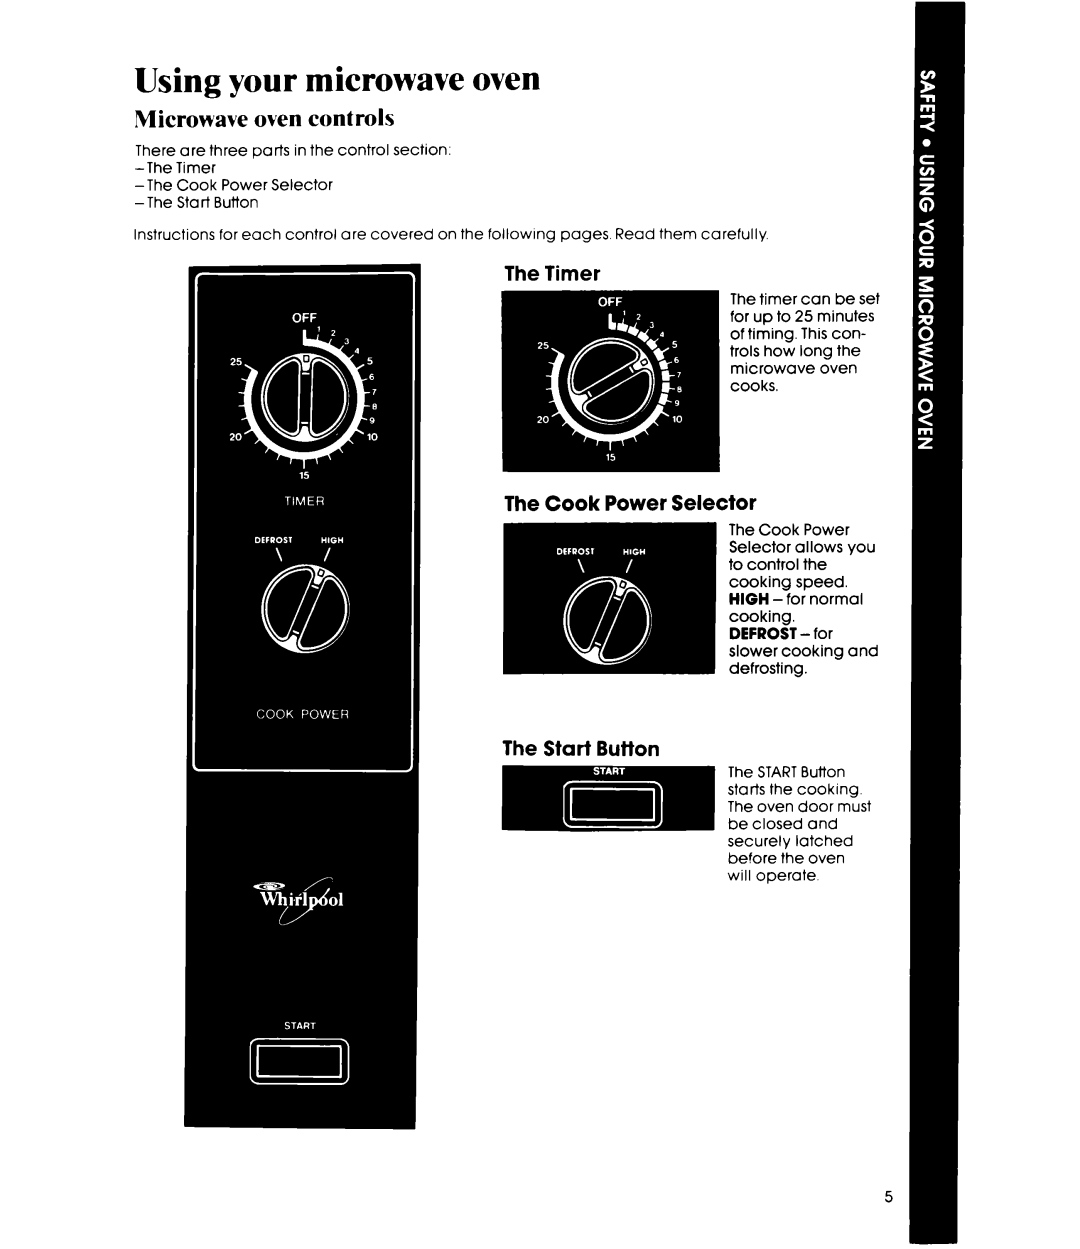 Whirlpool MW8100XR manual Using your microwave oven, Microwave oven controls, The Cook Power Selector, The Start Button 